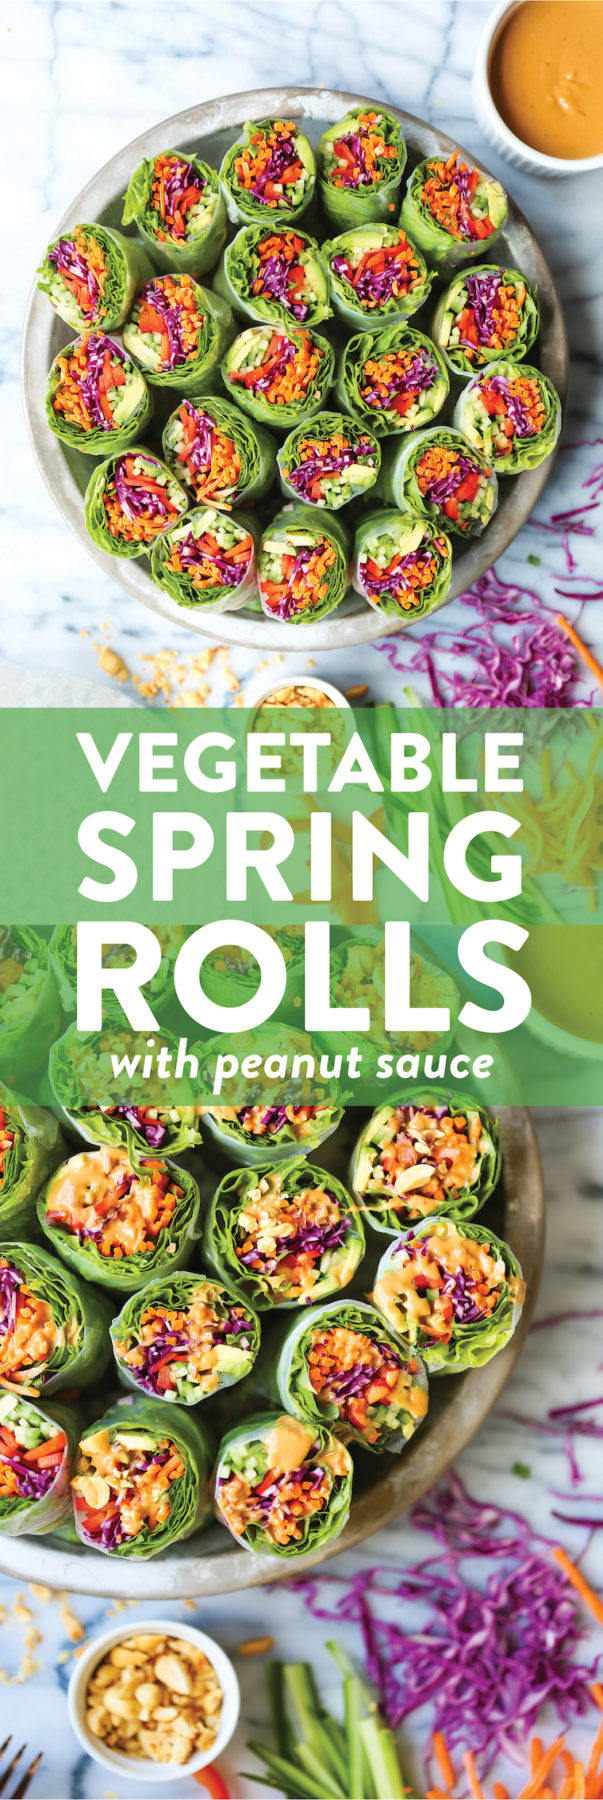 Vegetable Spring Rolls with Peanut Sauce - Damn Delicious